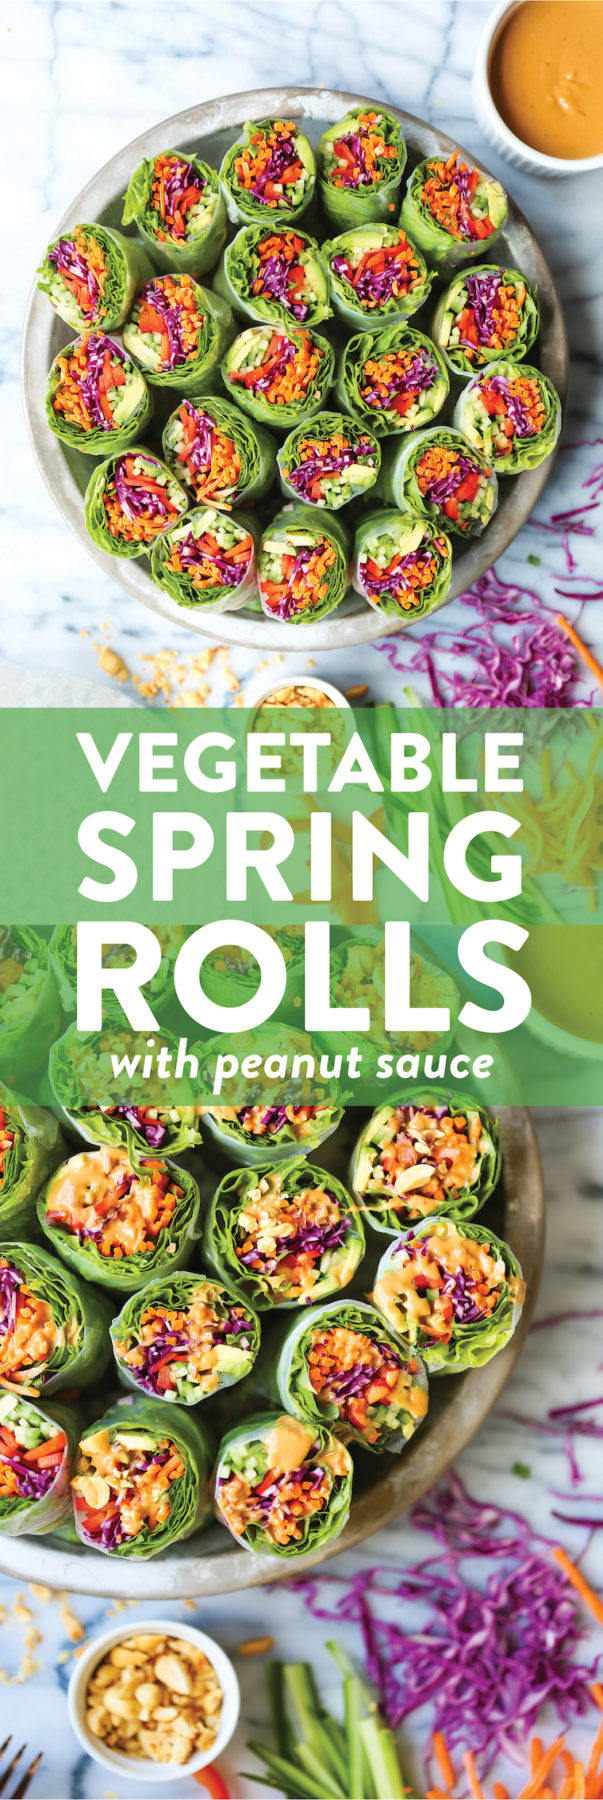 Vegetable Spring Rolls with Peanut Sauce - Damn Delicious